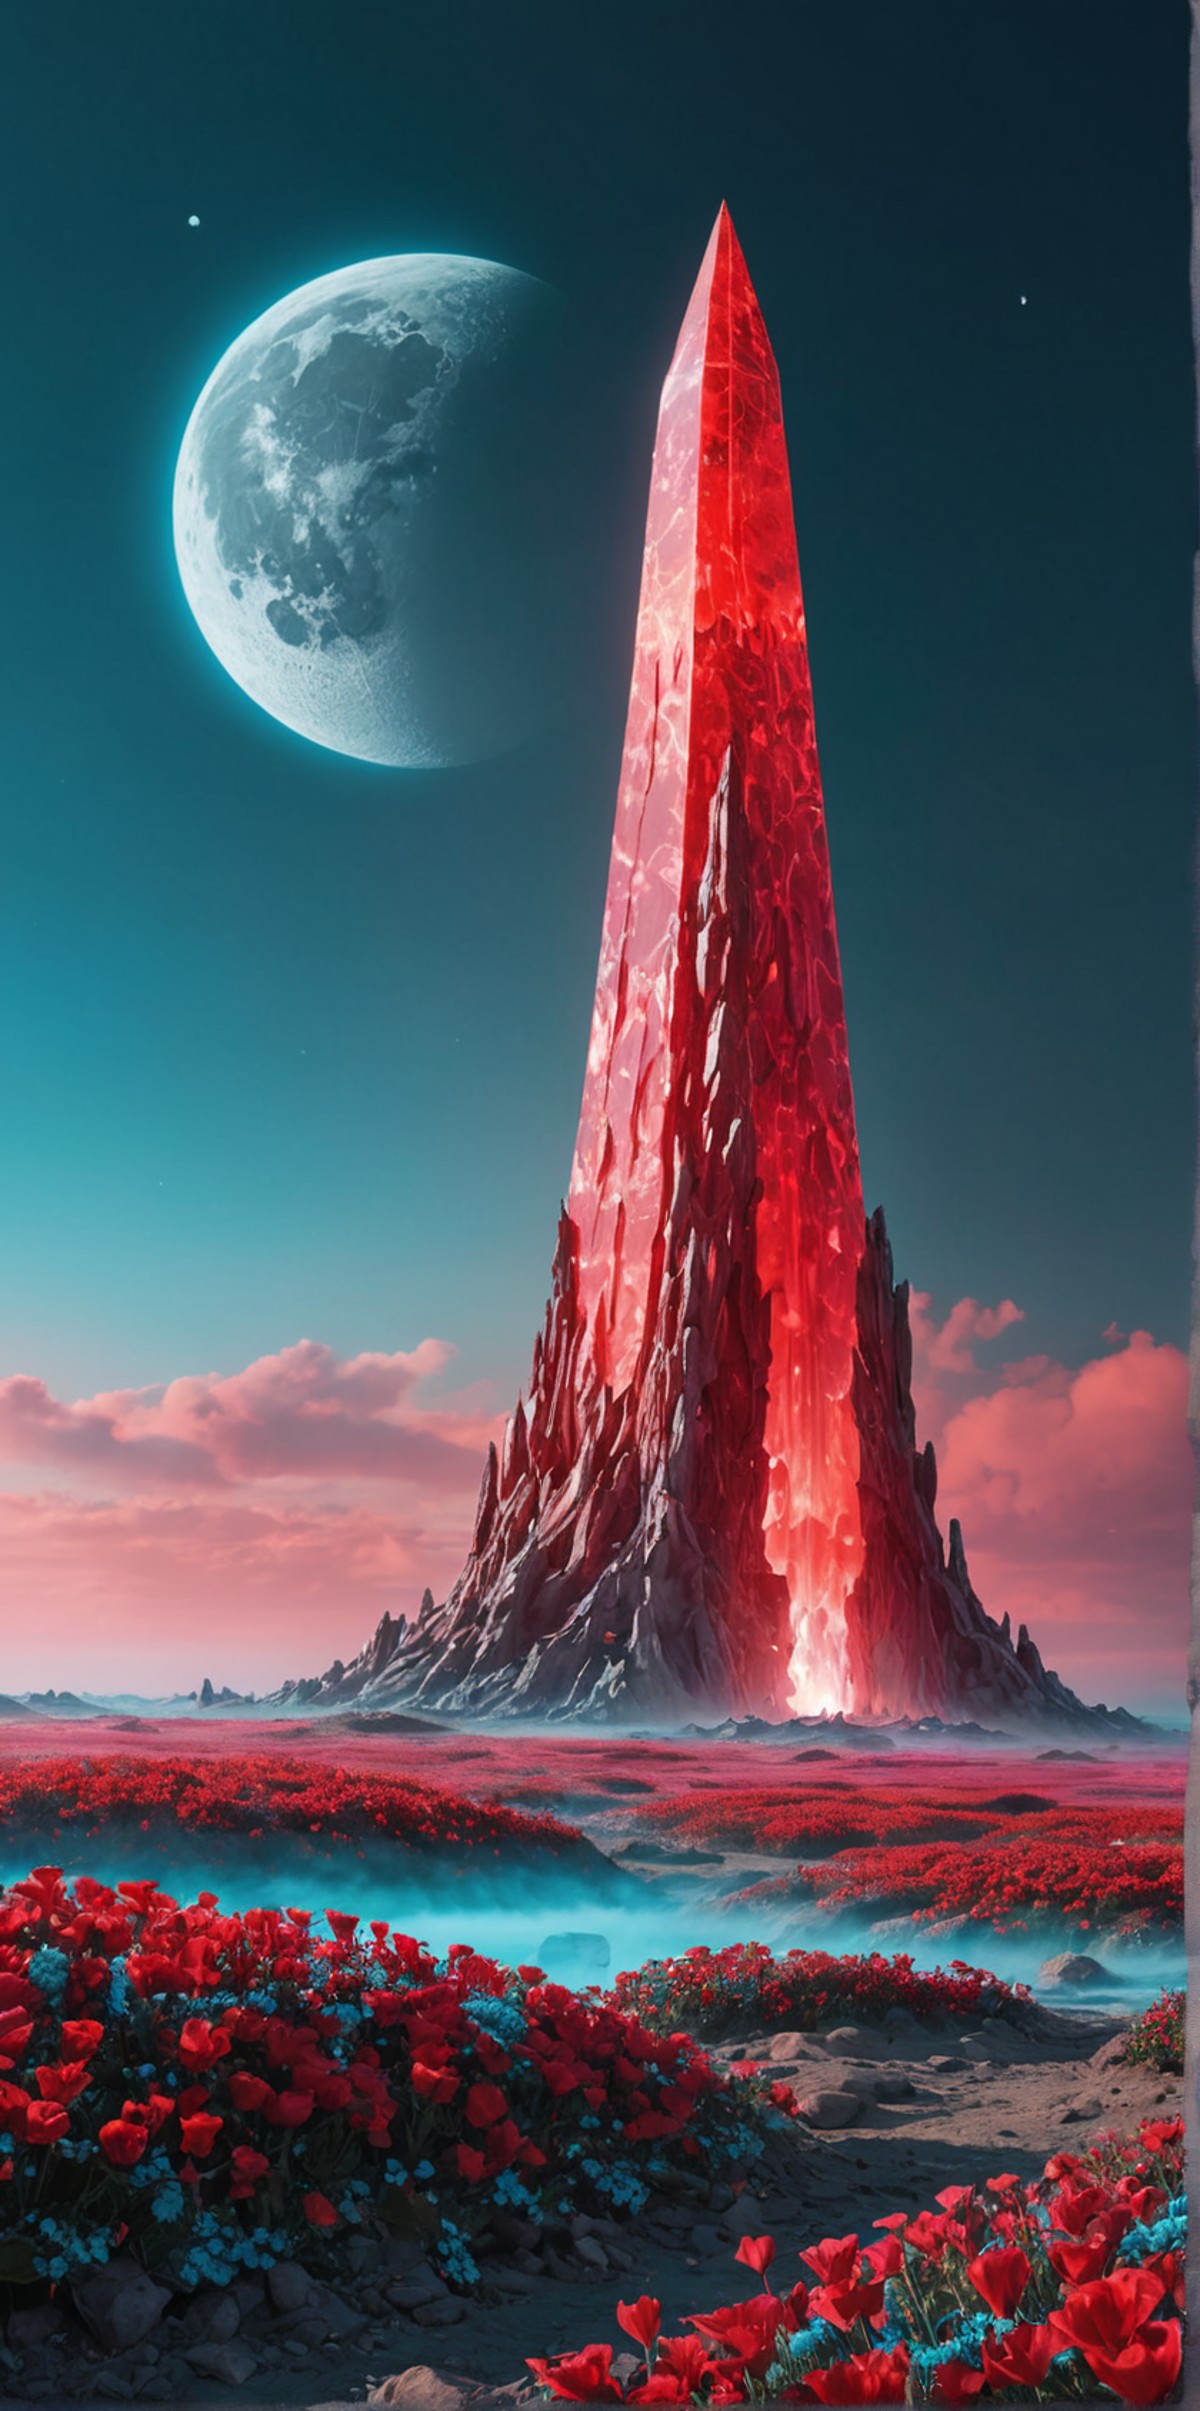 (8k digital photography:1.2)
an gigantic red crystal glass tower in an alien strange landscape surrounded by bright flower...